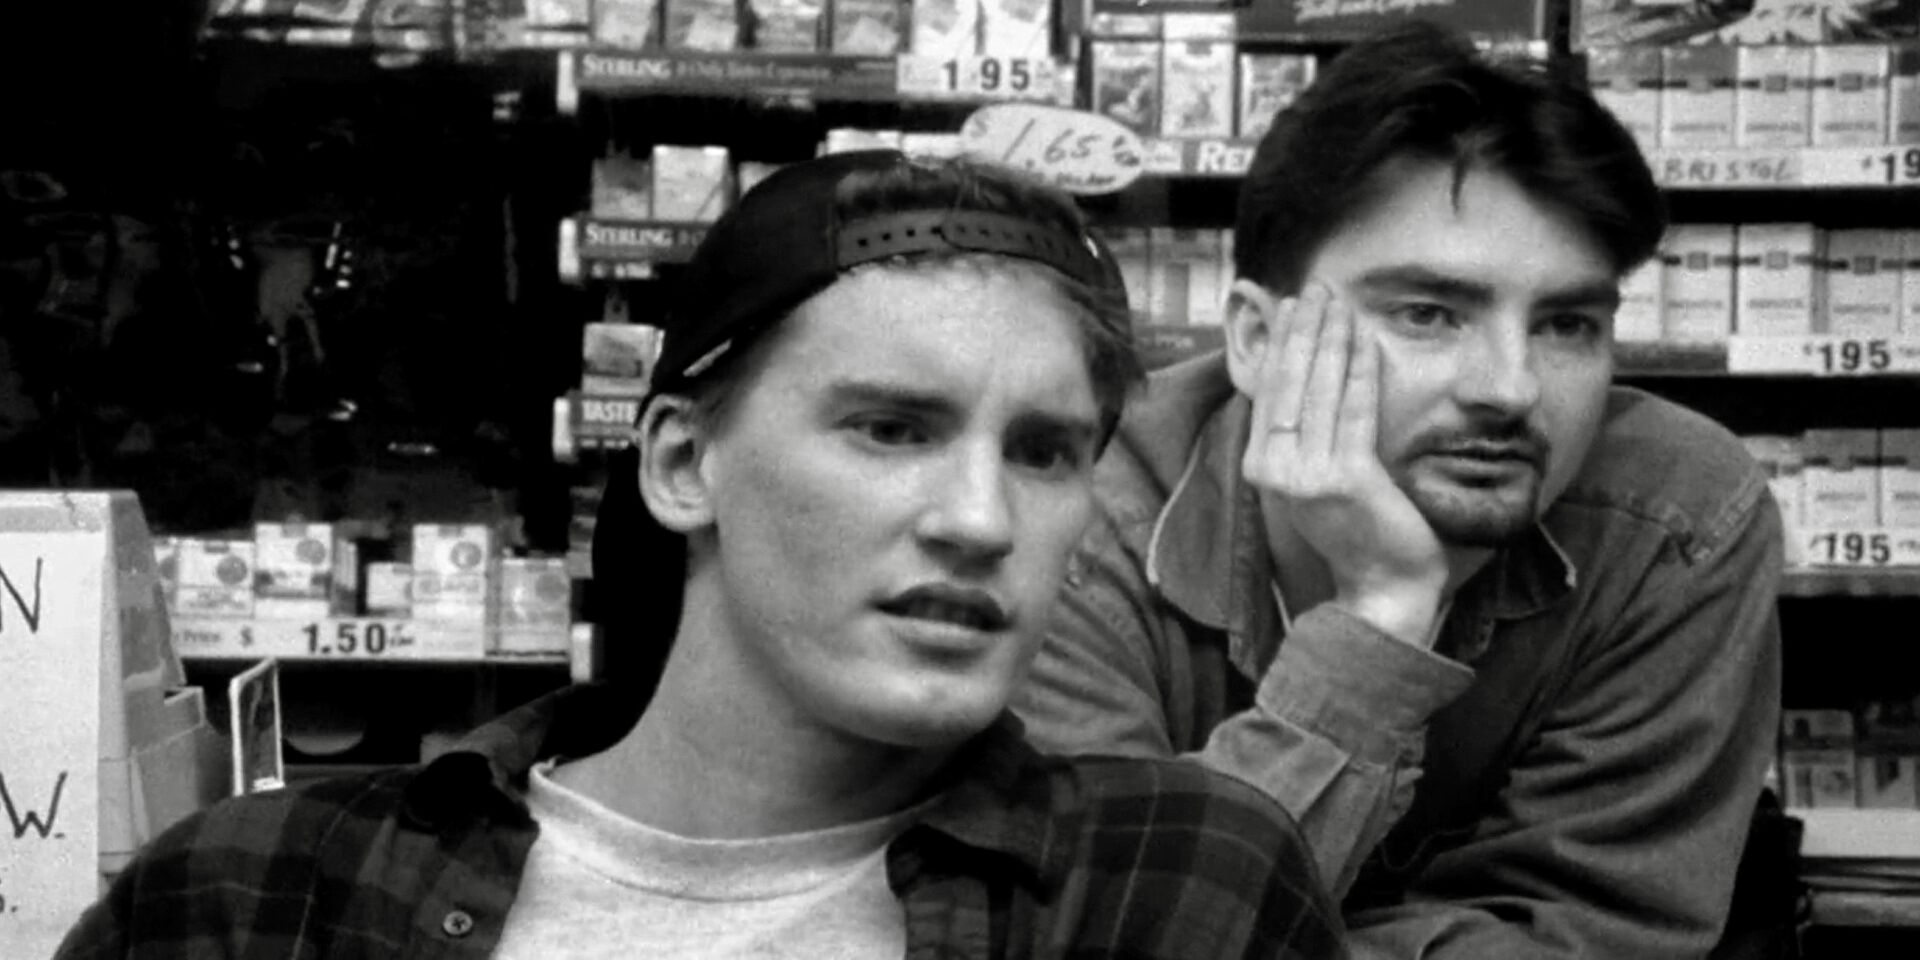 Two men at a grocery store in Clerks 1994